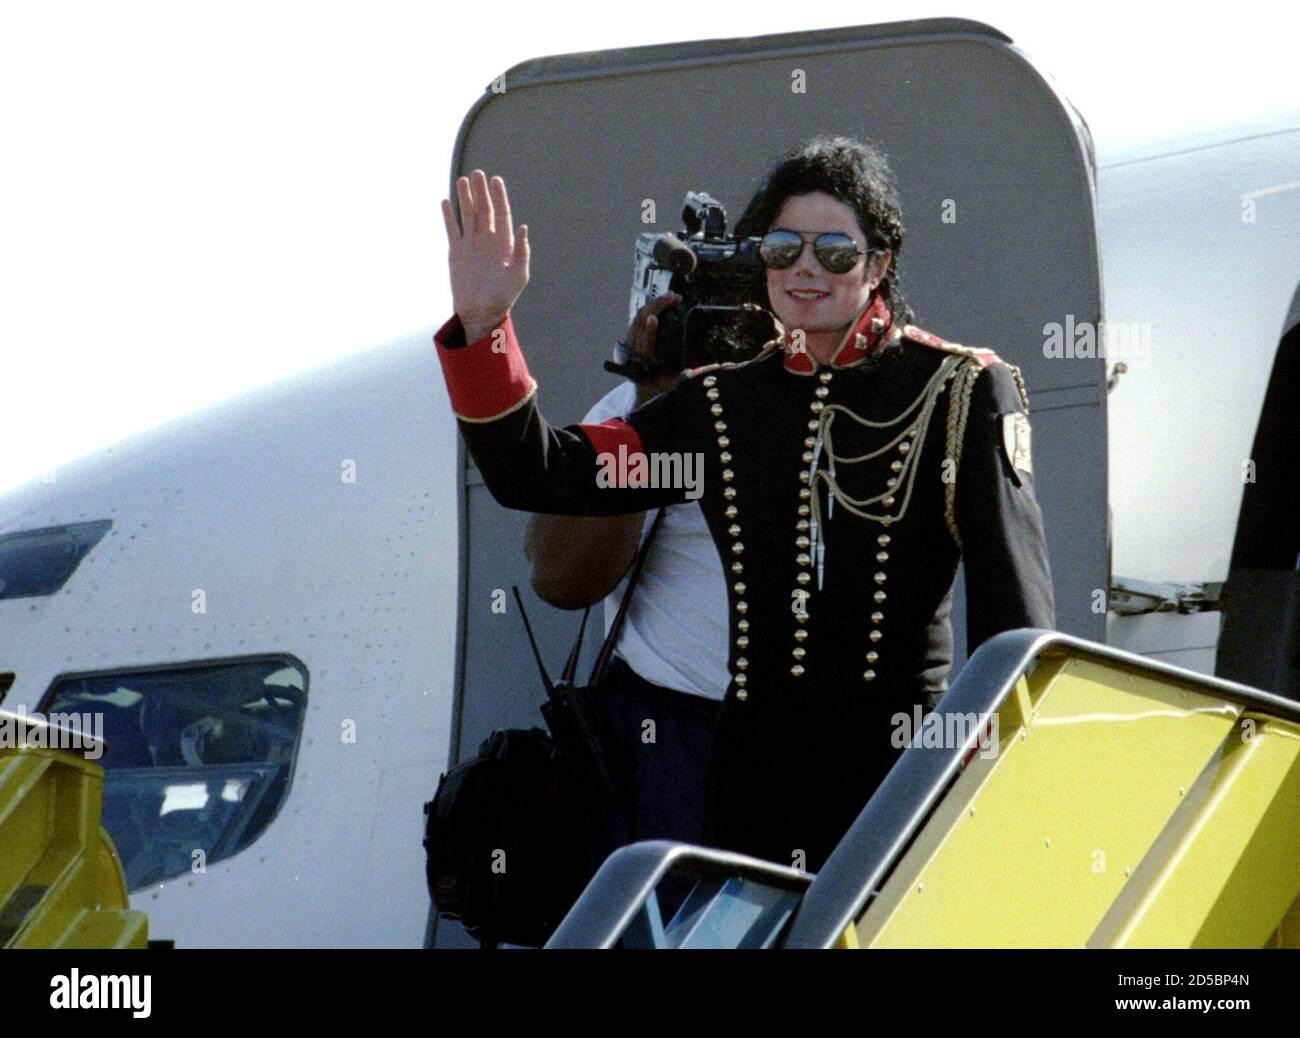 American pop star Michael Jackson waves to fans from his private aircraft as he arrives at Johannesburg International airport July 18. Jackson who is not due to give any concerts in South Africa, is on a three-day visit sponsored by an unlikely coalition of big business and radical black politicians. Stock Photo